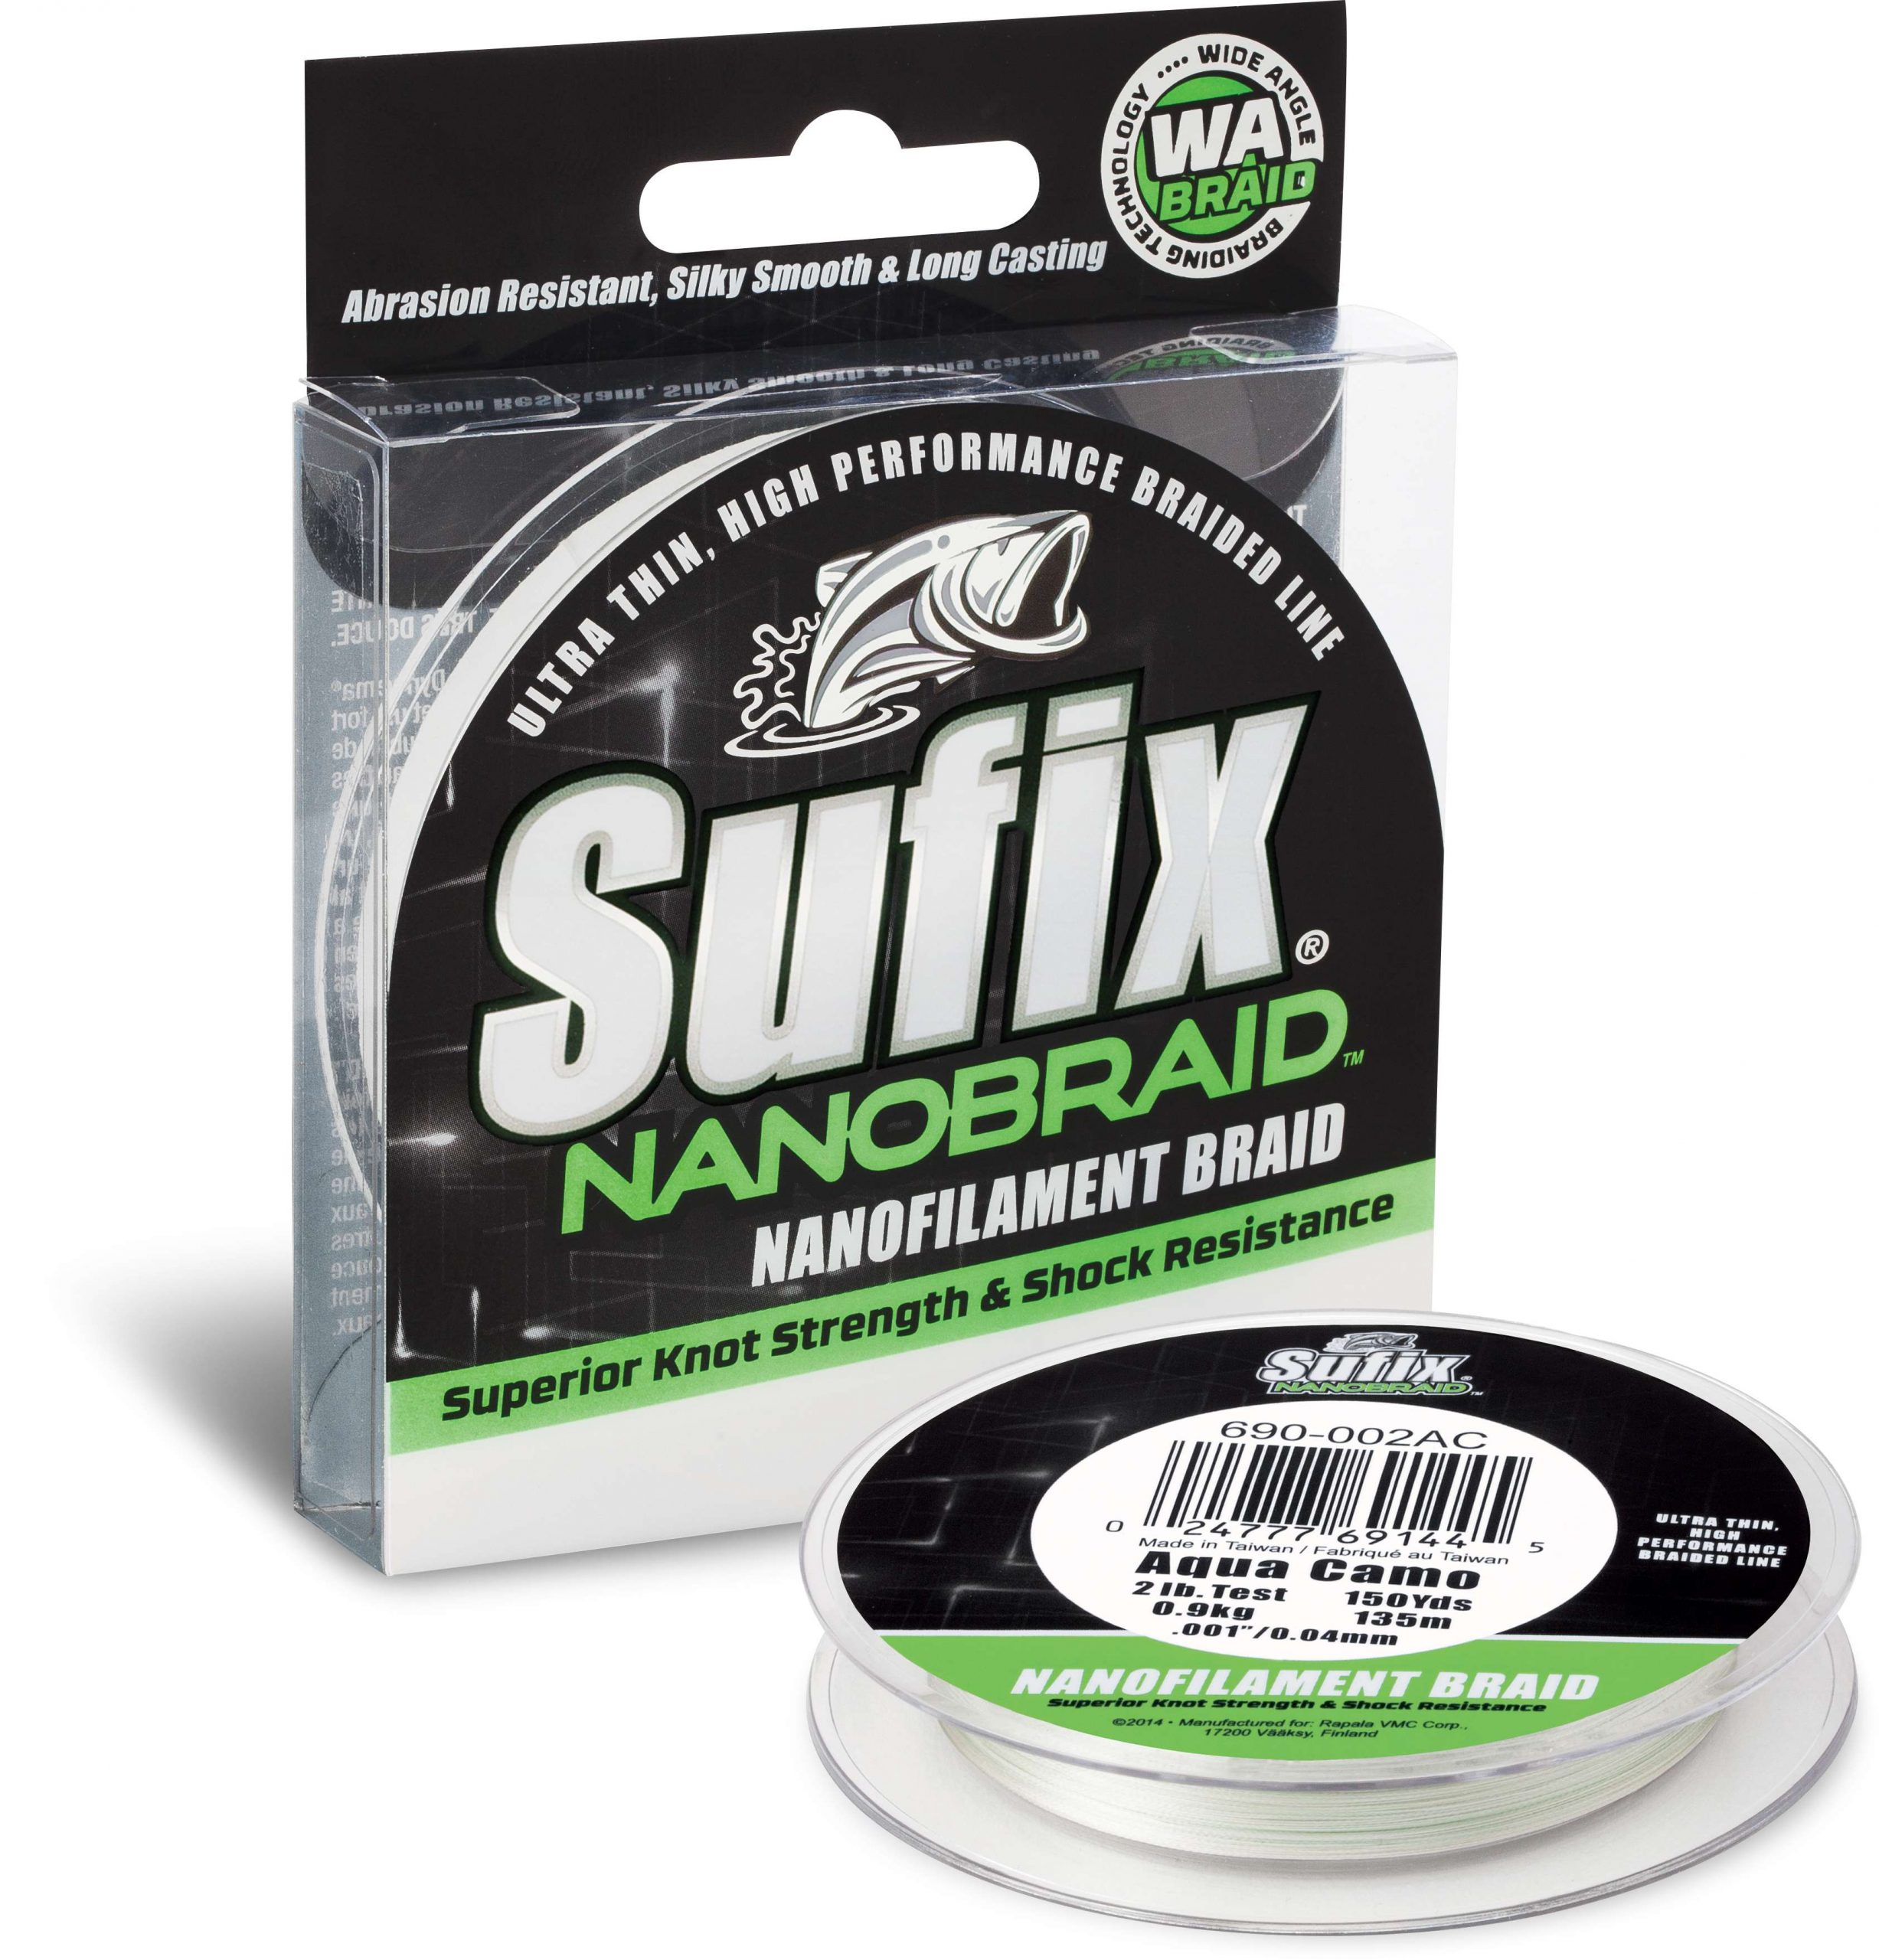 <b>Sufix</b><br>	Nanobraid<br>				Sufix says this new wide-angle braiding technology is three times stronger than other lines in the same category. It has all the benefits of braid - strength, smoothness and sensitivity. 